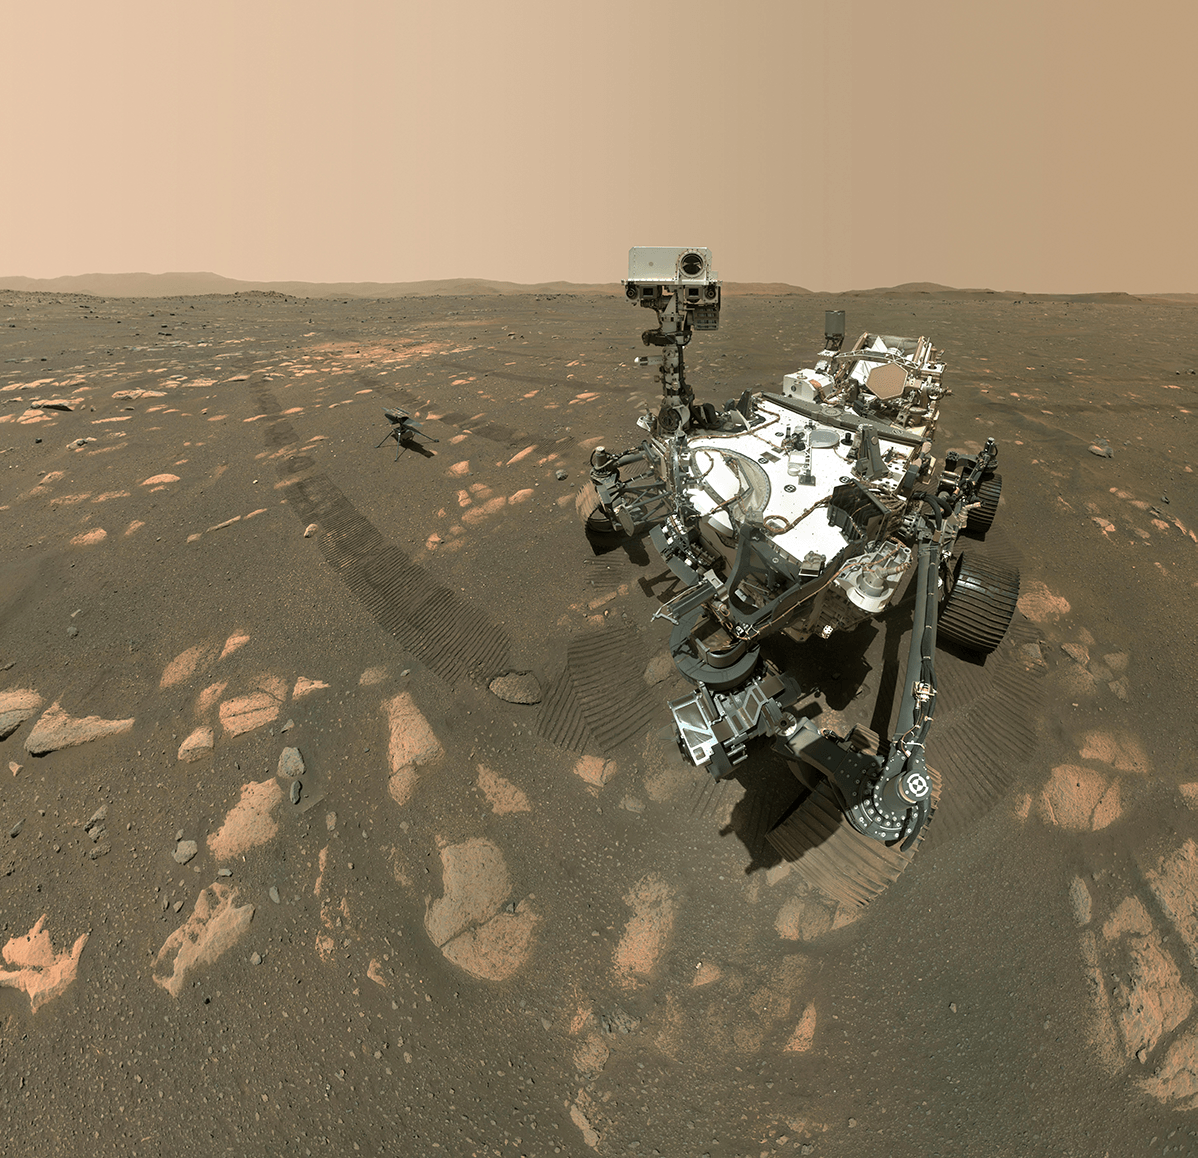 The Perseverance rover and its helicoper appear on the gray-brown floor of Mars, interspersed with orangish rocks. A ridge is visible on the horizon, and the sky is a hazy orange.